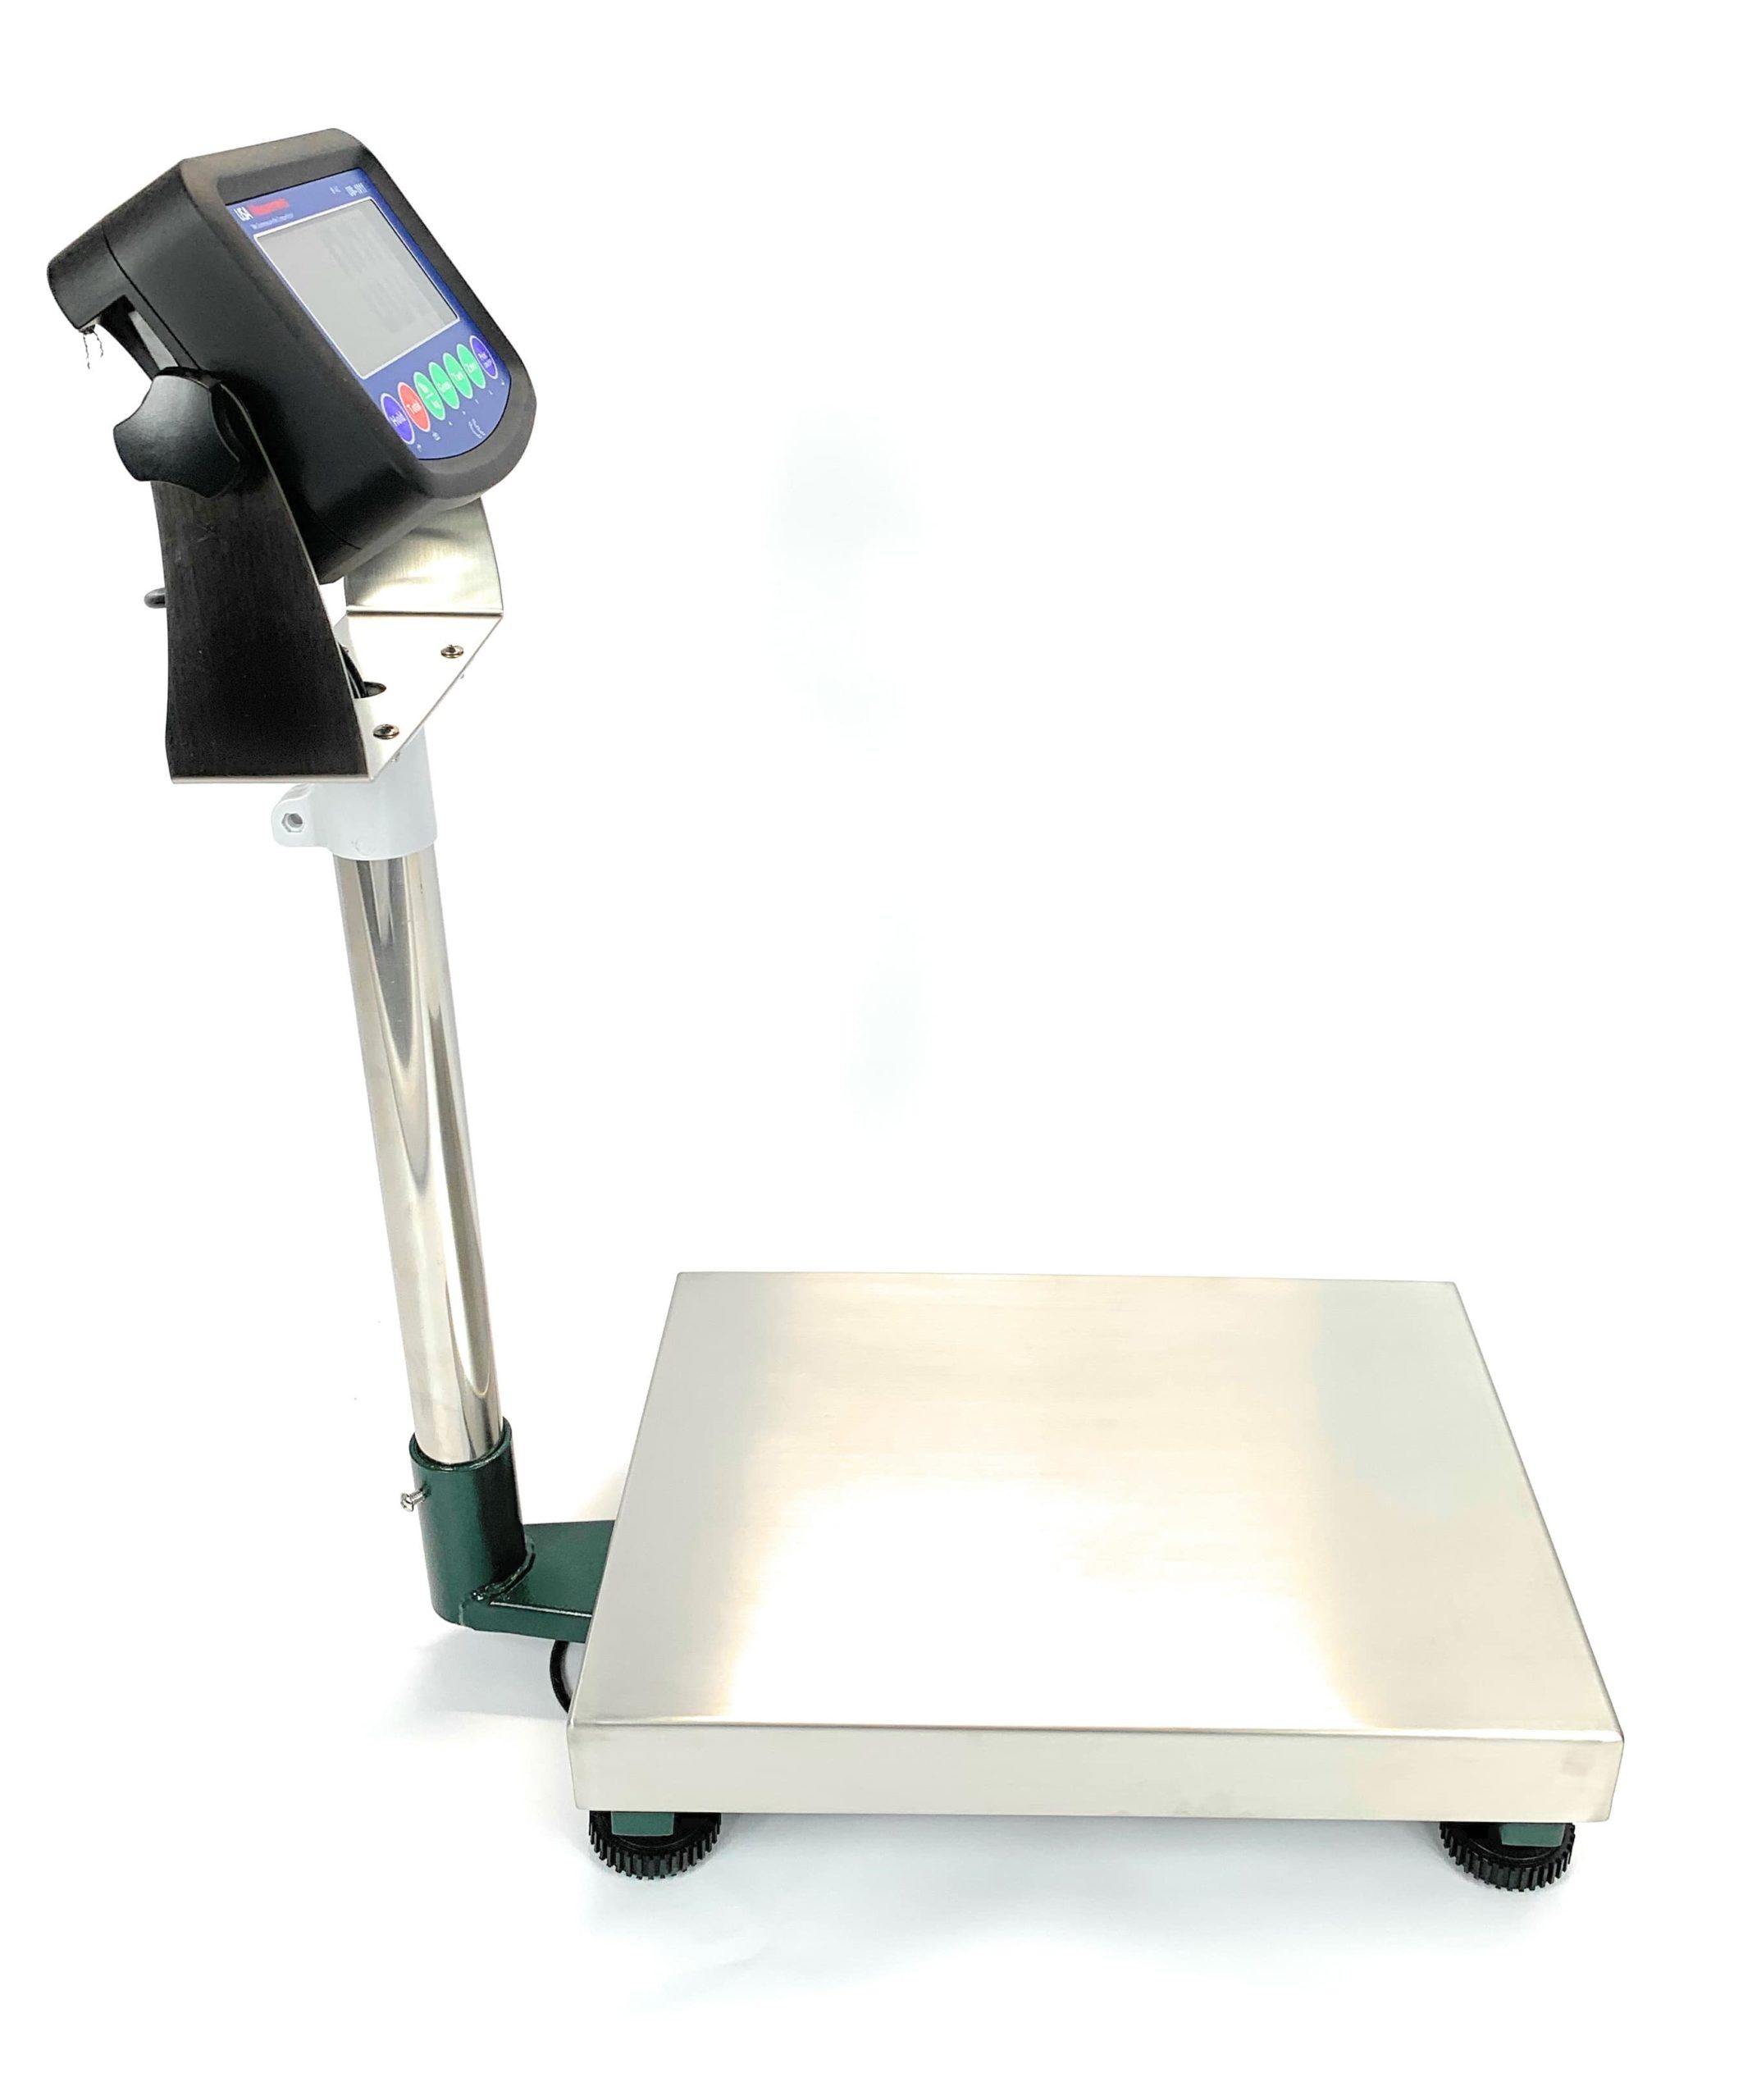 Buy PS-B1000 22″x32″ 1000x0.1lb Bench Scale with Casters